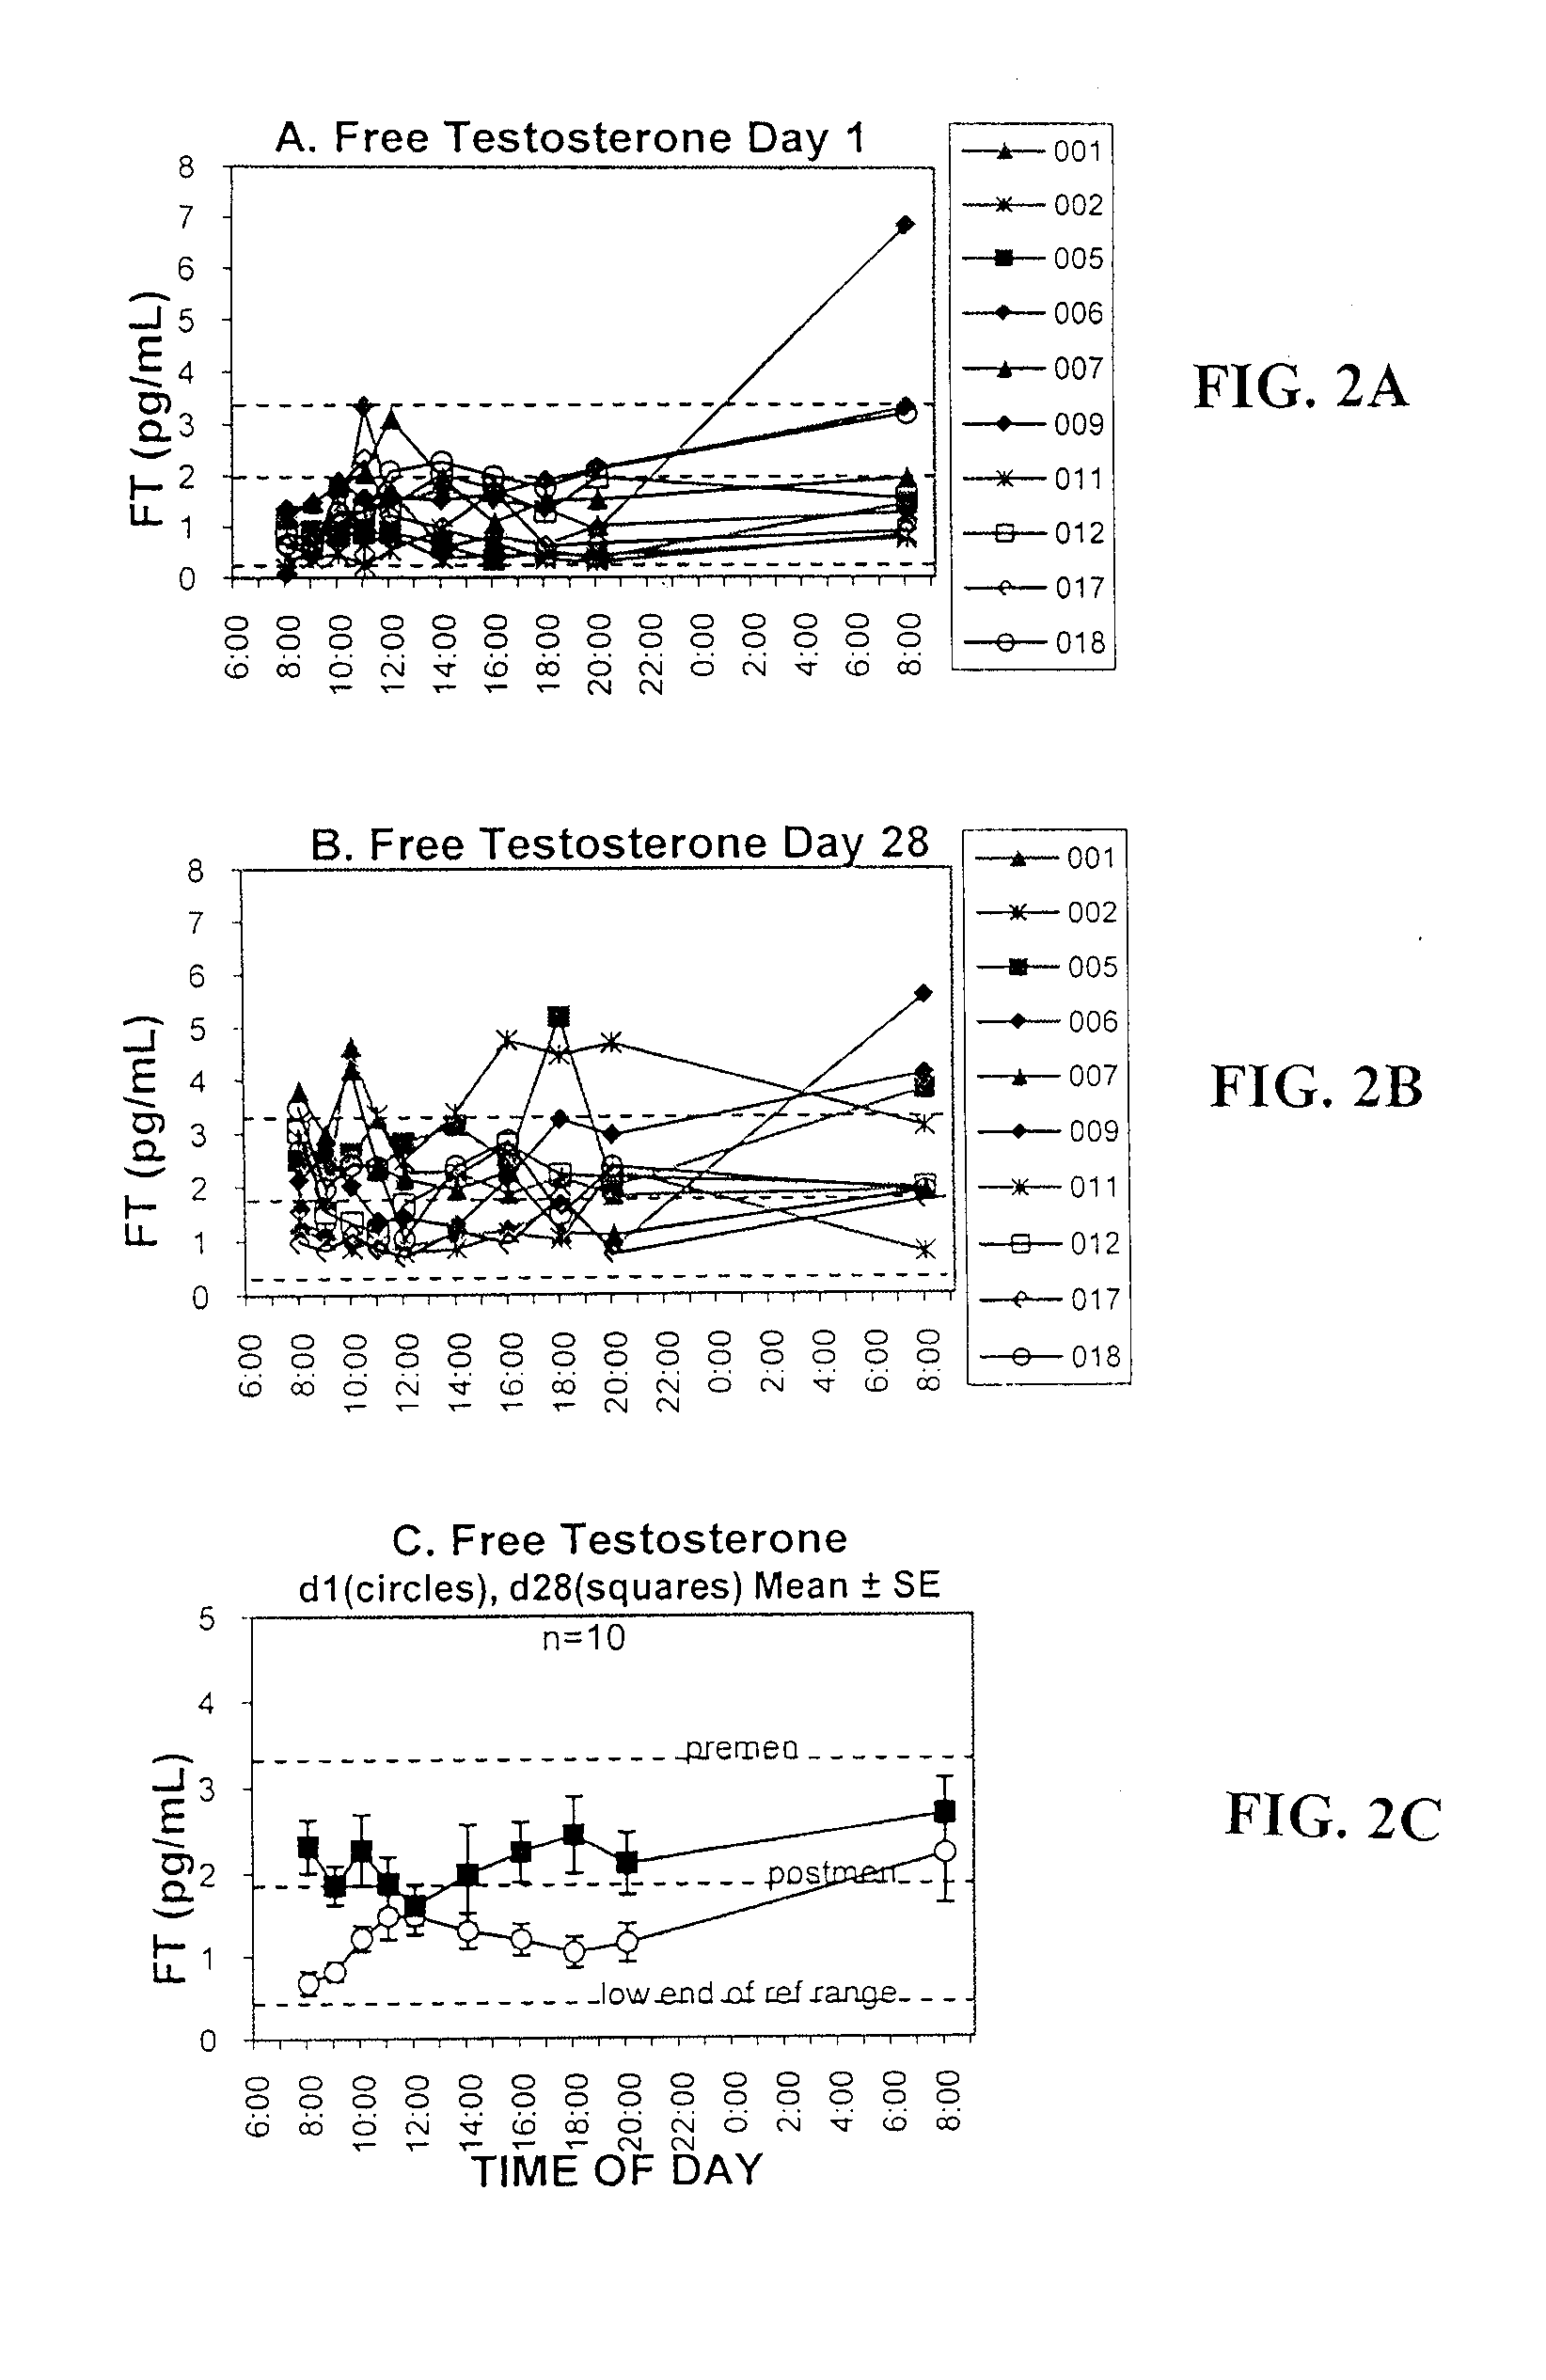 Methods for the Treatment of Fibromyalgia and Chronic Fatigue Syndrome